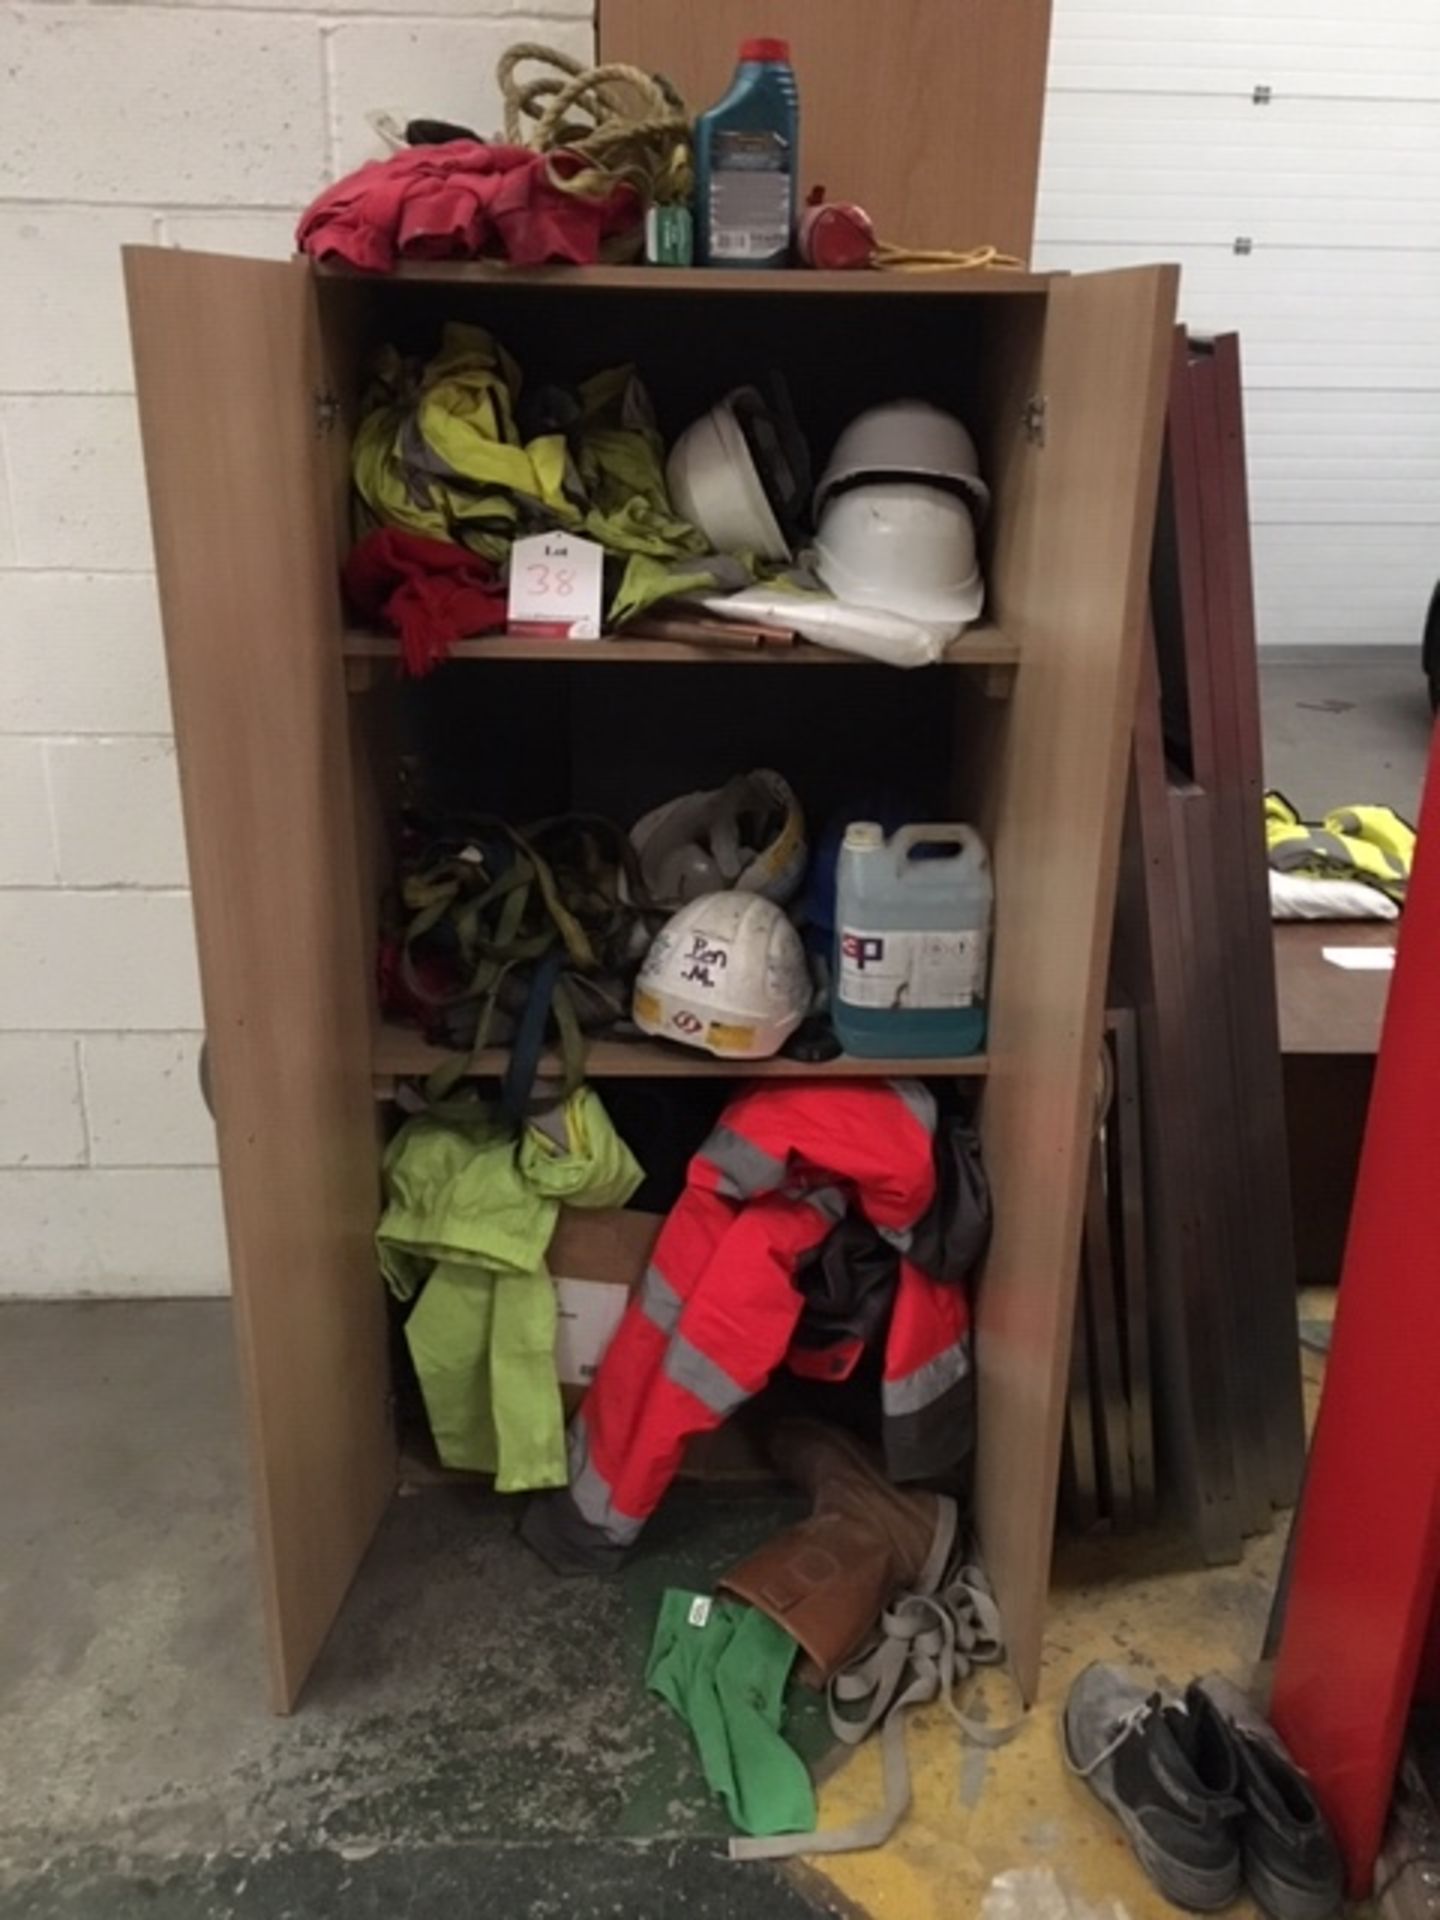 Contents of Wooden Filing Cabinet - Includes Hi-Vis Clothing, Ratchet Straps - Please see Photos